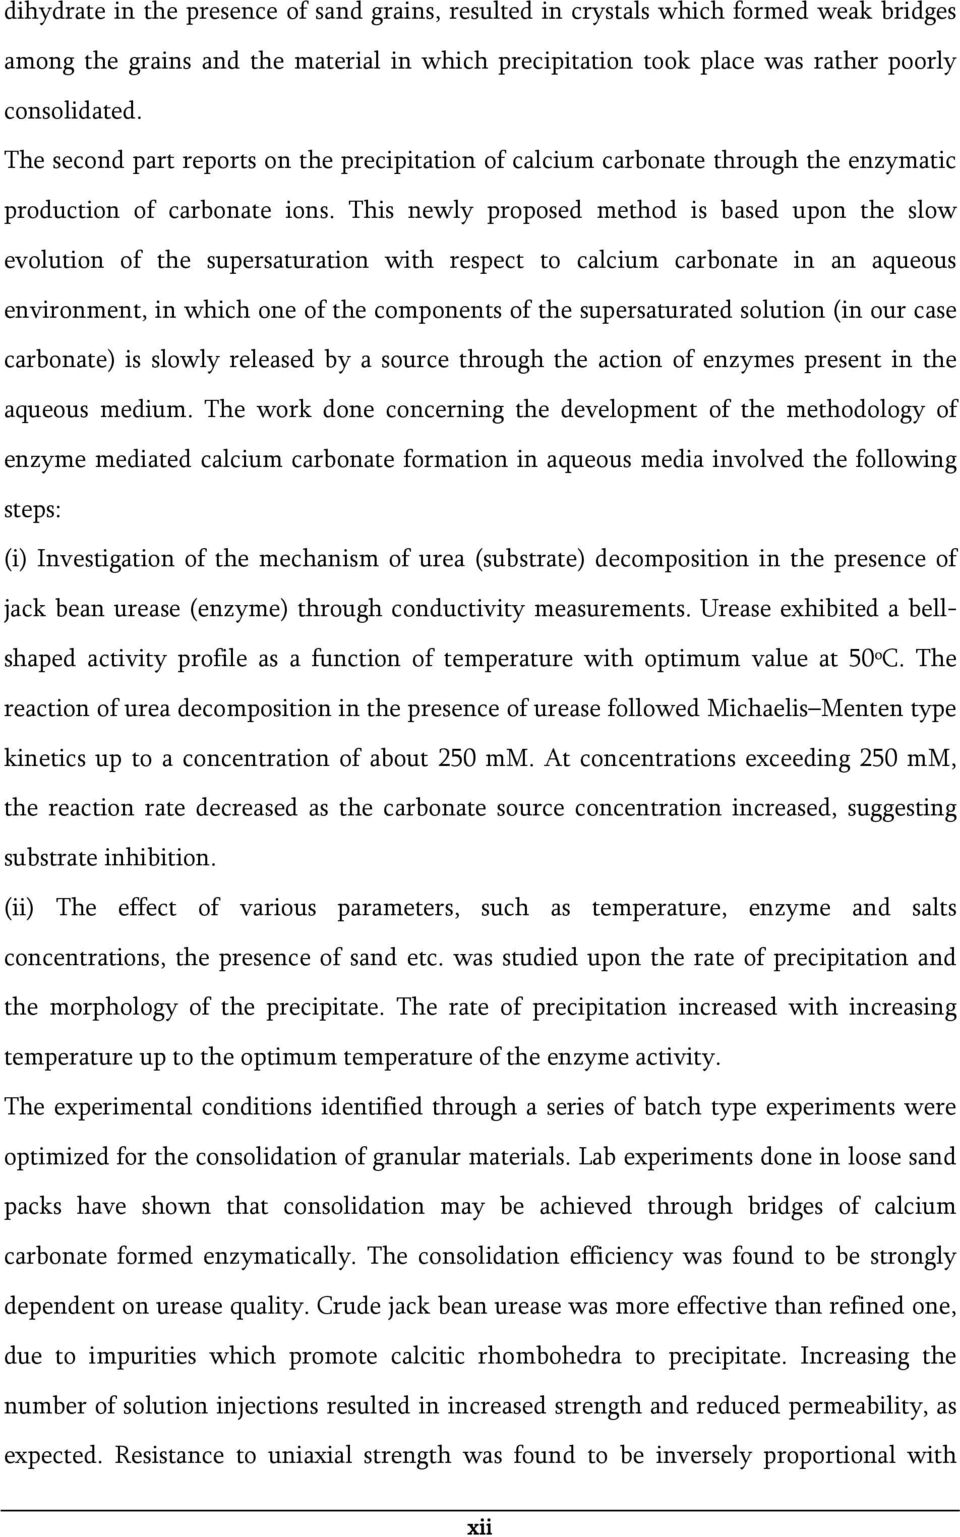 This newly proposed method is based upon the slow evolution of the supersaturation with respect to calcium carbonate in an aqueous environment, in which one of the components of the supersaturated